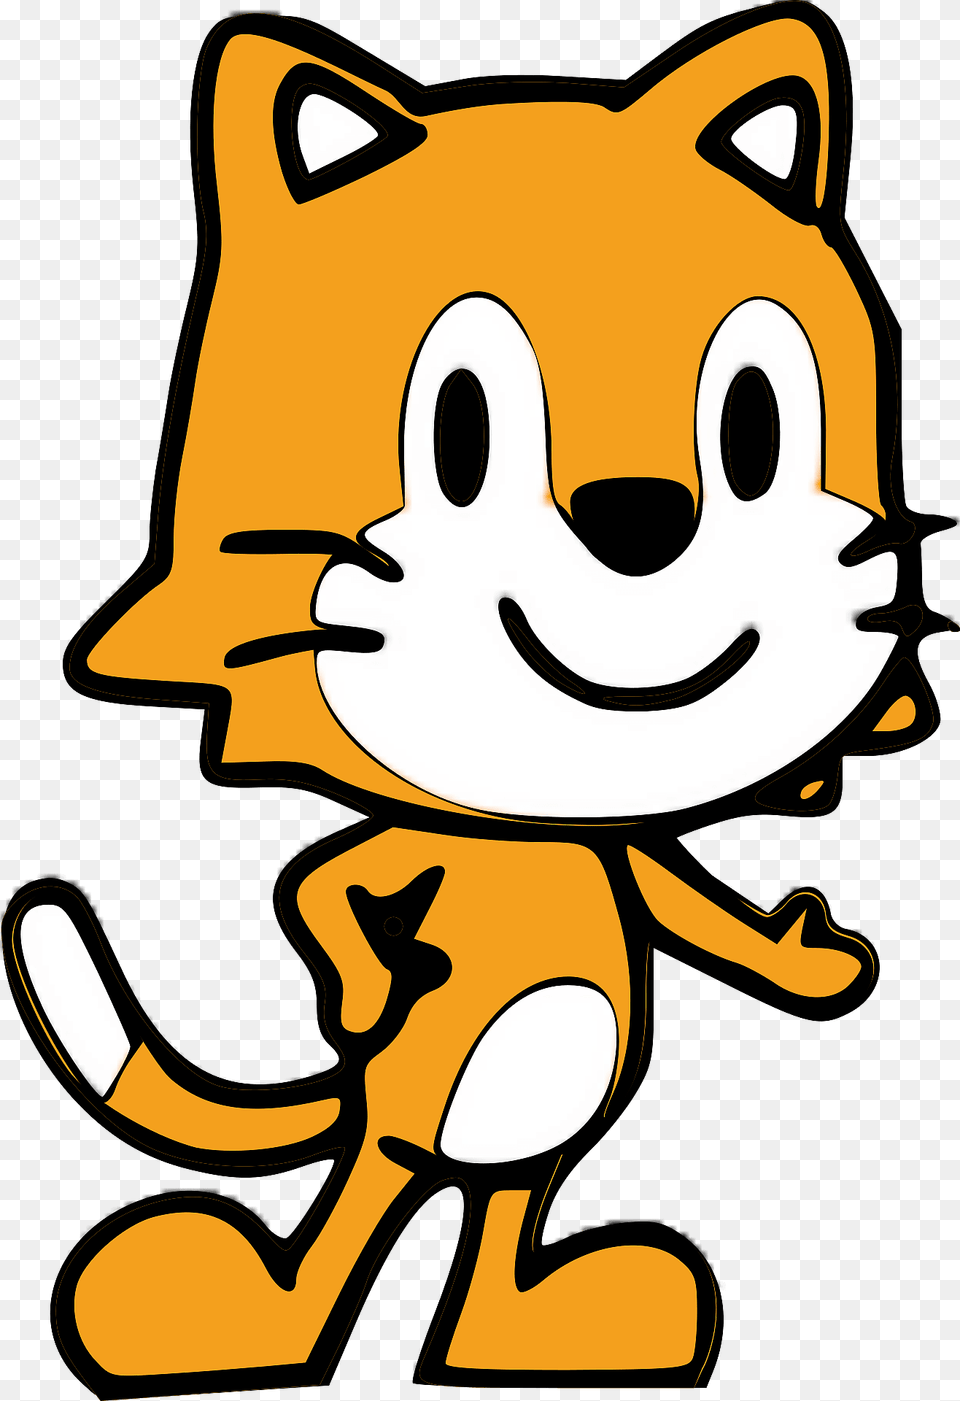 Smiley Ginger Cat Clipart, Sticker, Toy, Plush, Cartoon Free Transparent Png